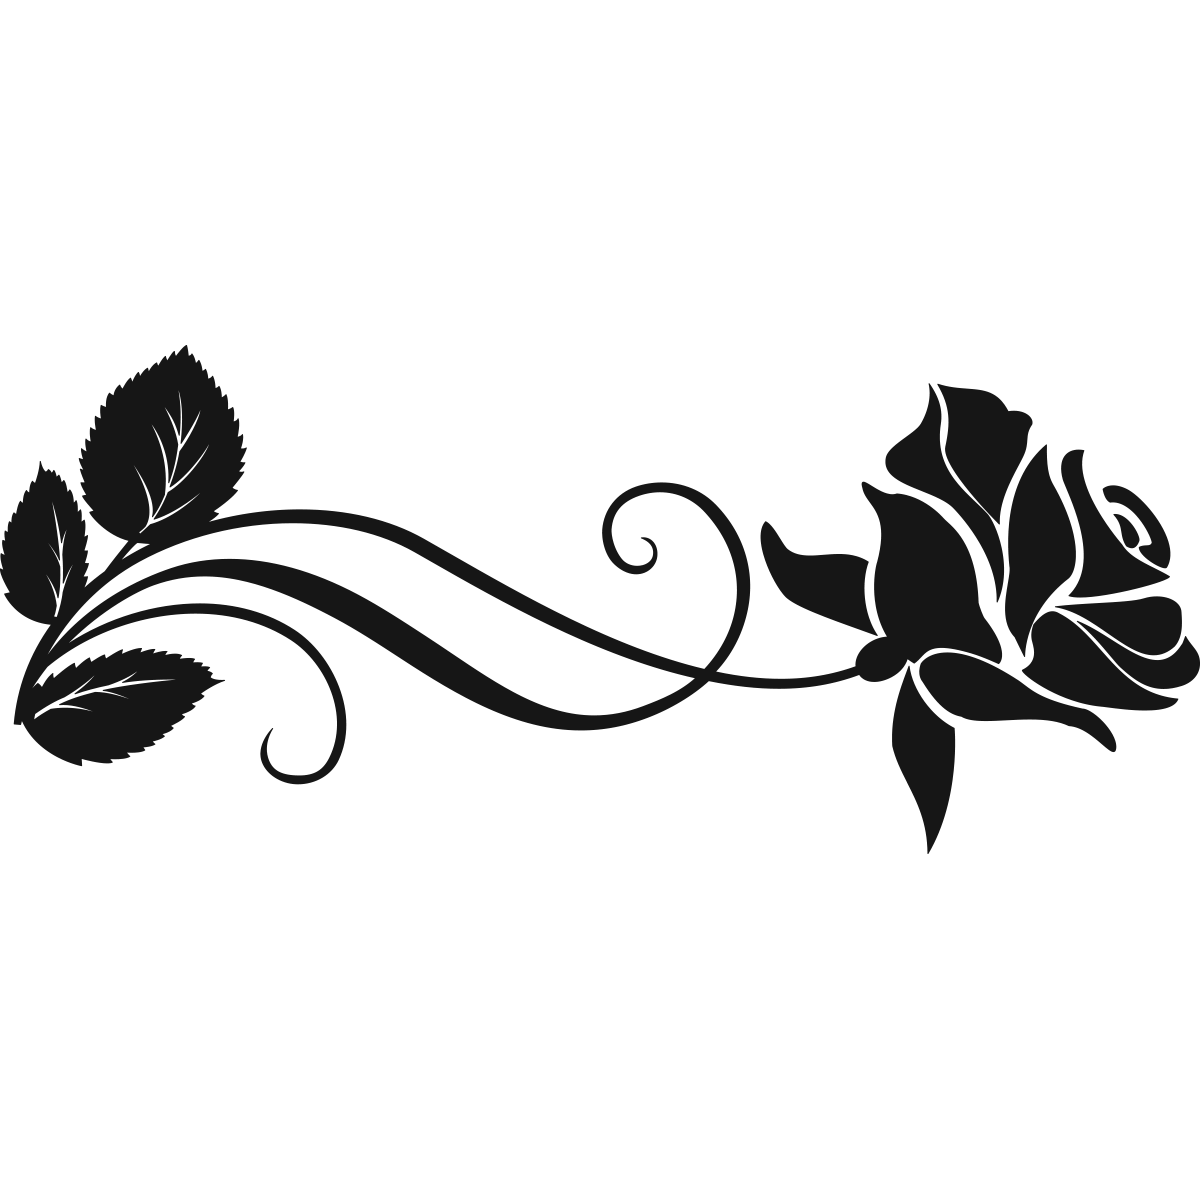 Clip art Rose Vector graphics Silhouette Flower - rose png ... - Black and White Rose Print